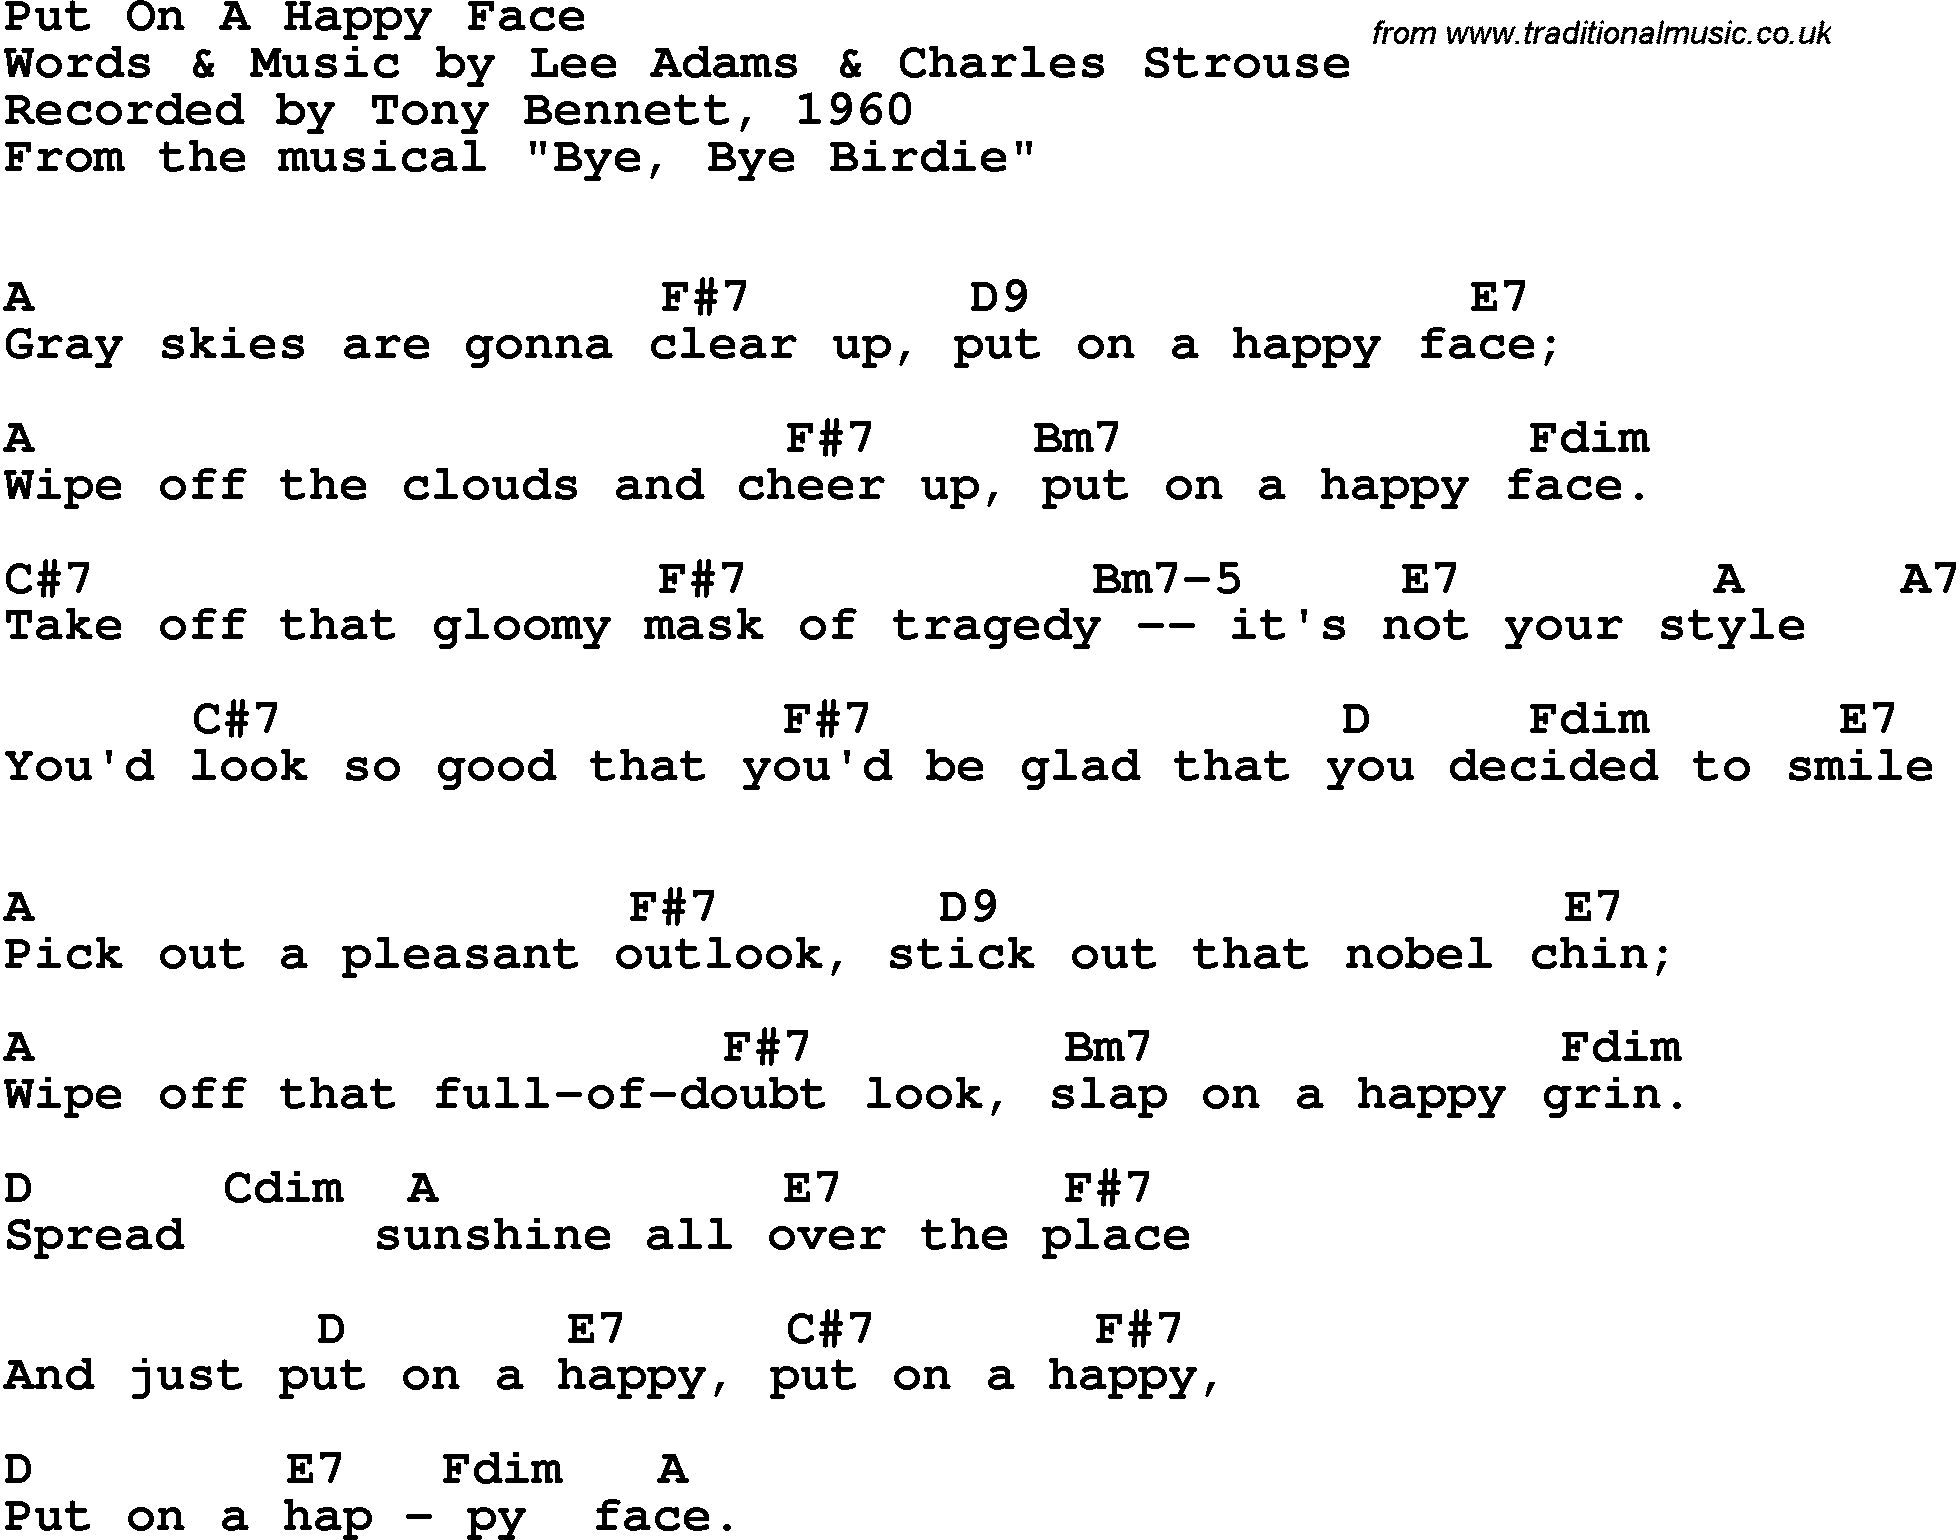 Song Lyrics with guitar chords for Put On A Happy Face - Tony Bennett, 1950